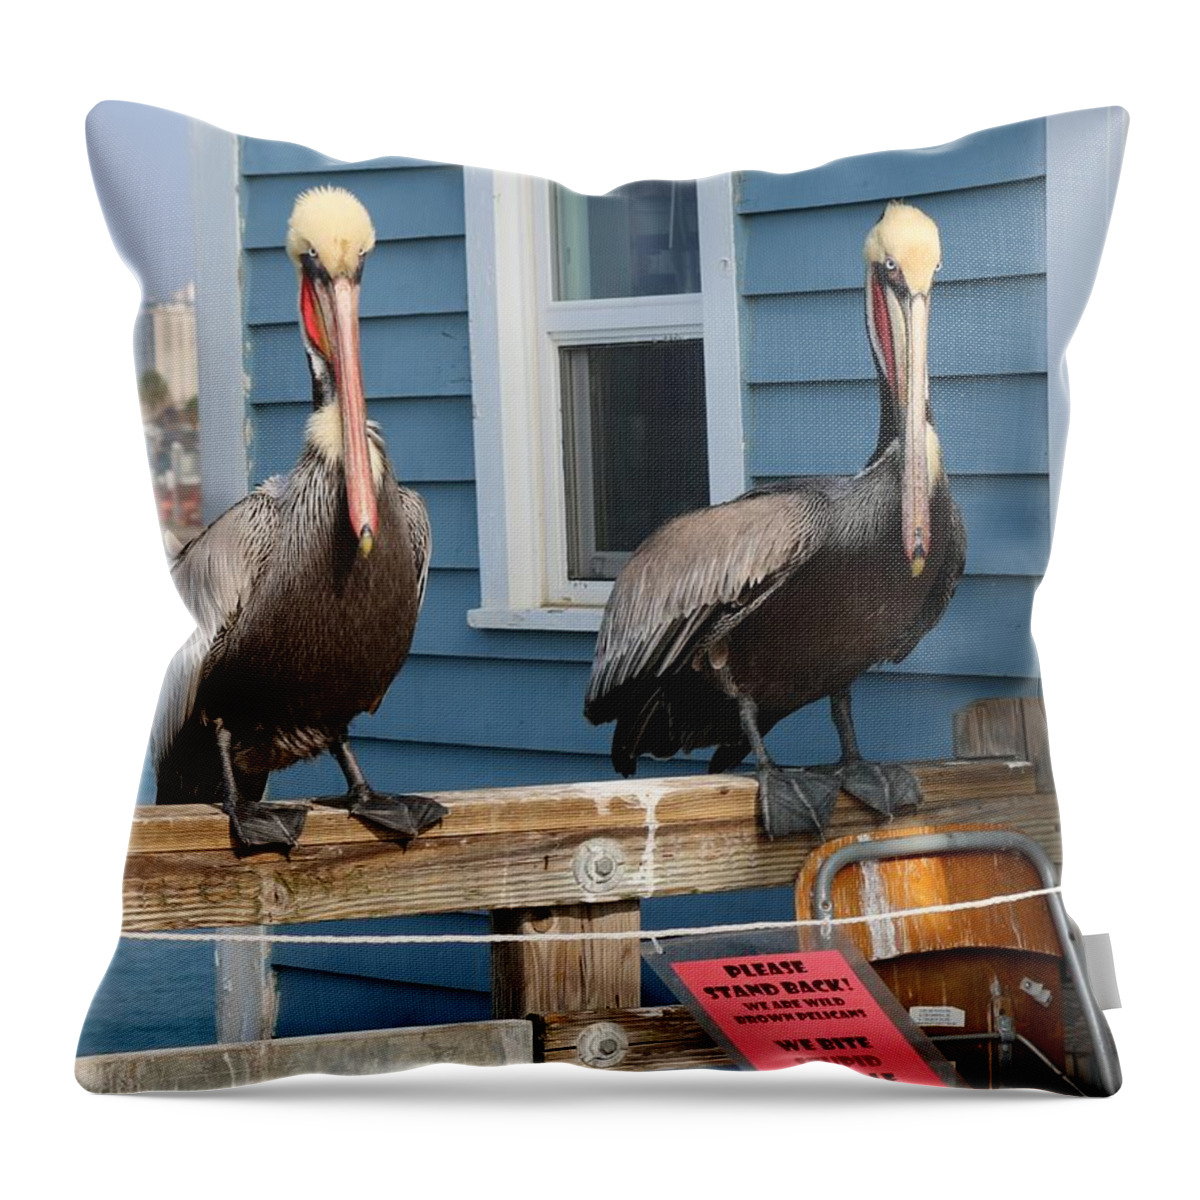 Pelican Throw Pillow featuring the photograph Pelican Pals - 3 by Christy Pooschke